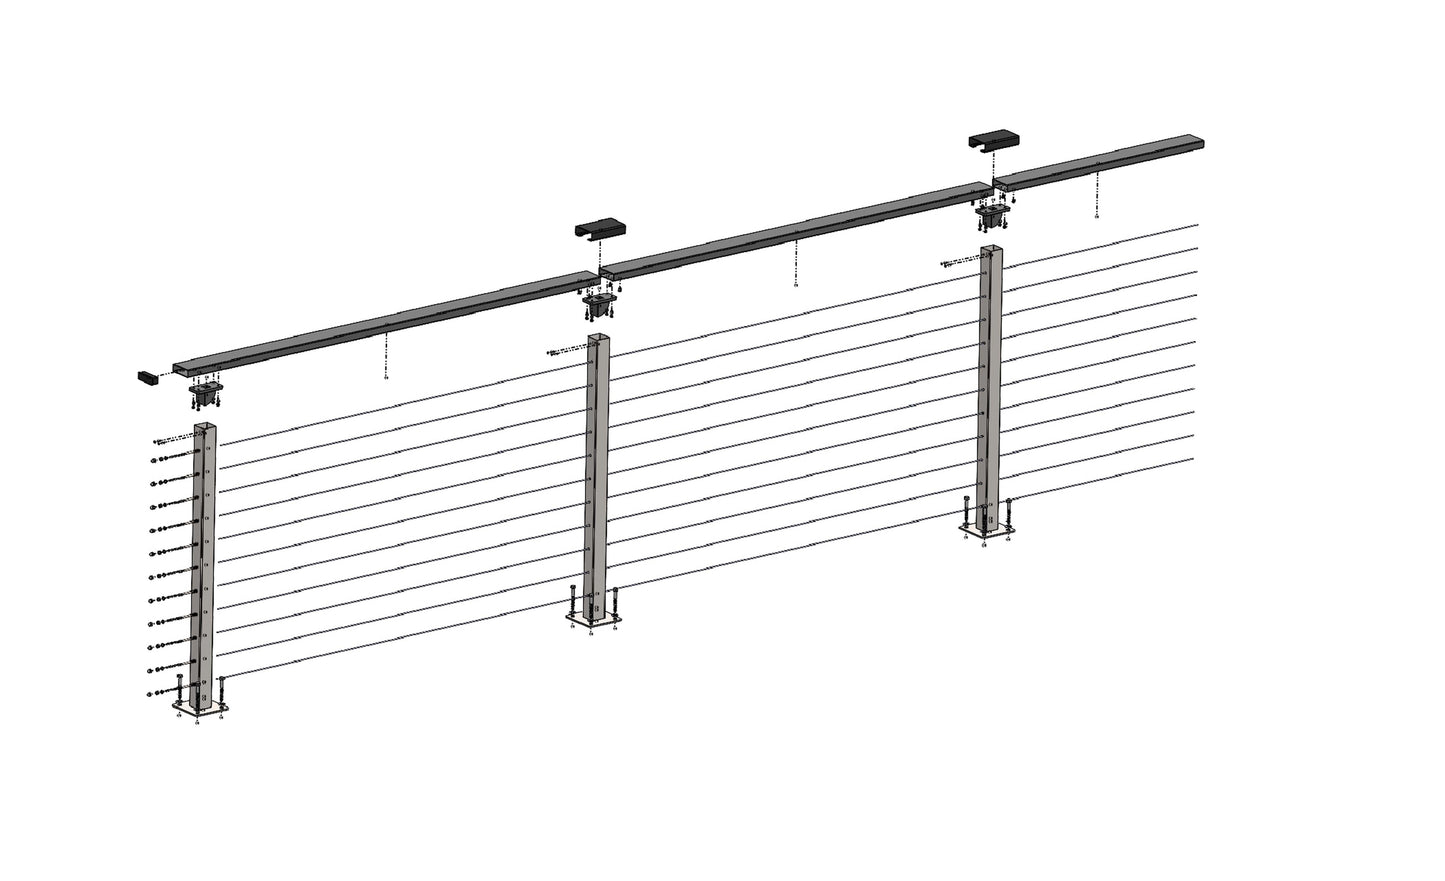 42 ft. x 42 in. White Deck Cable Railing, Base Mount , Stainless